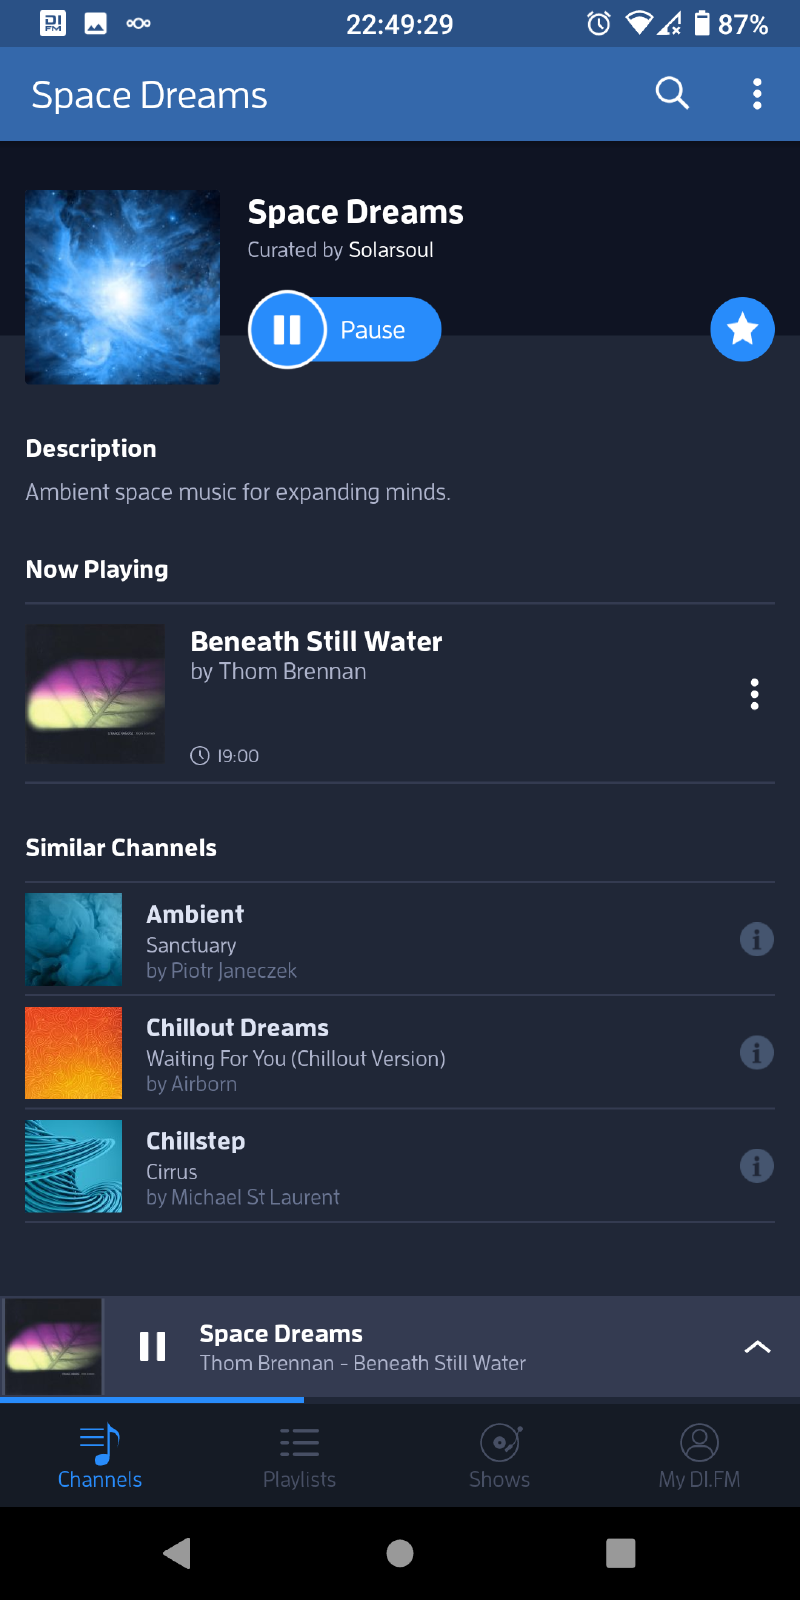 Channel detail page